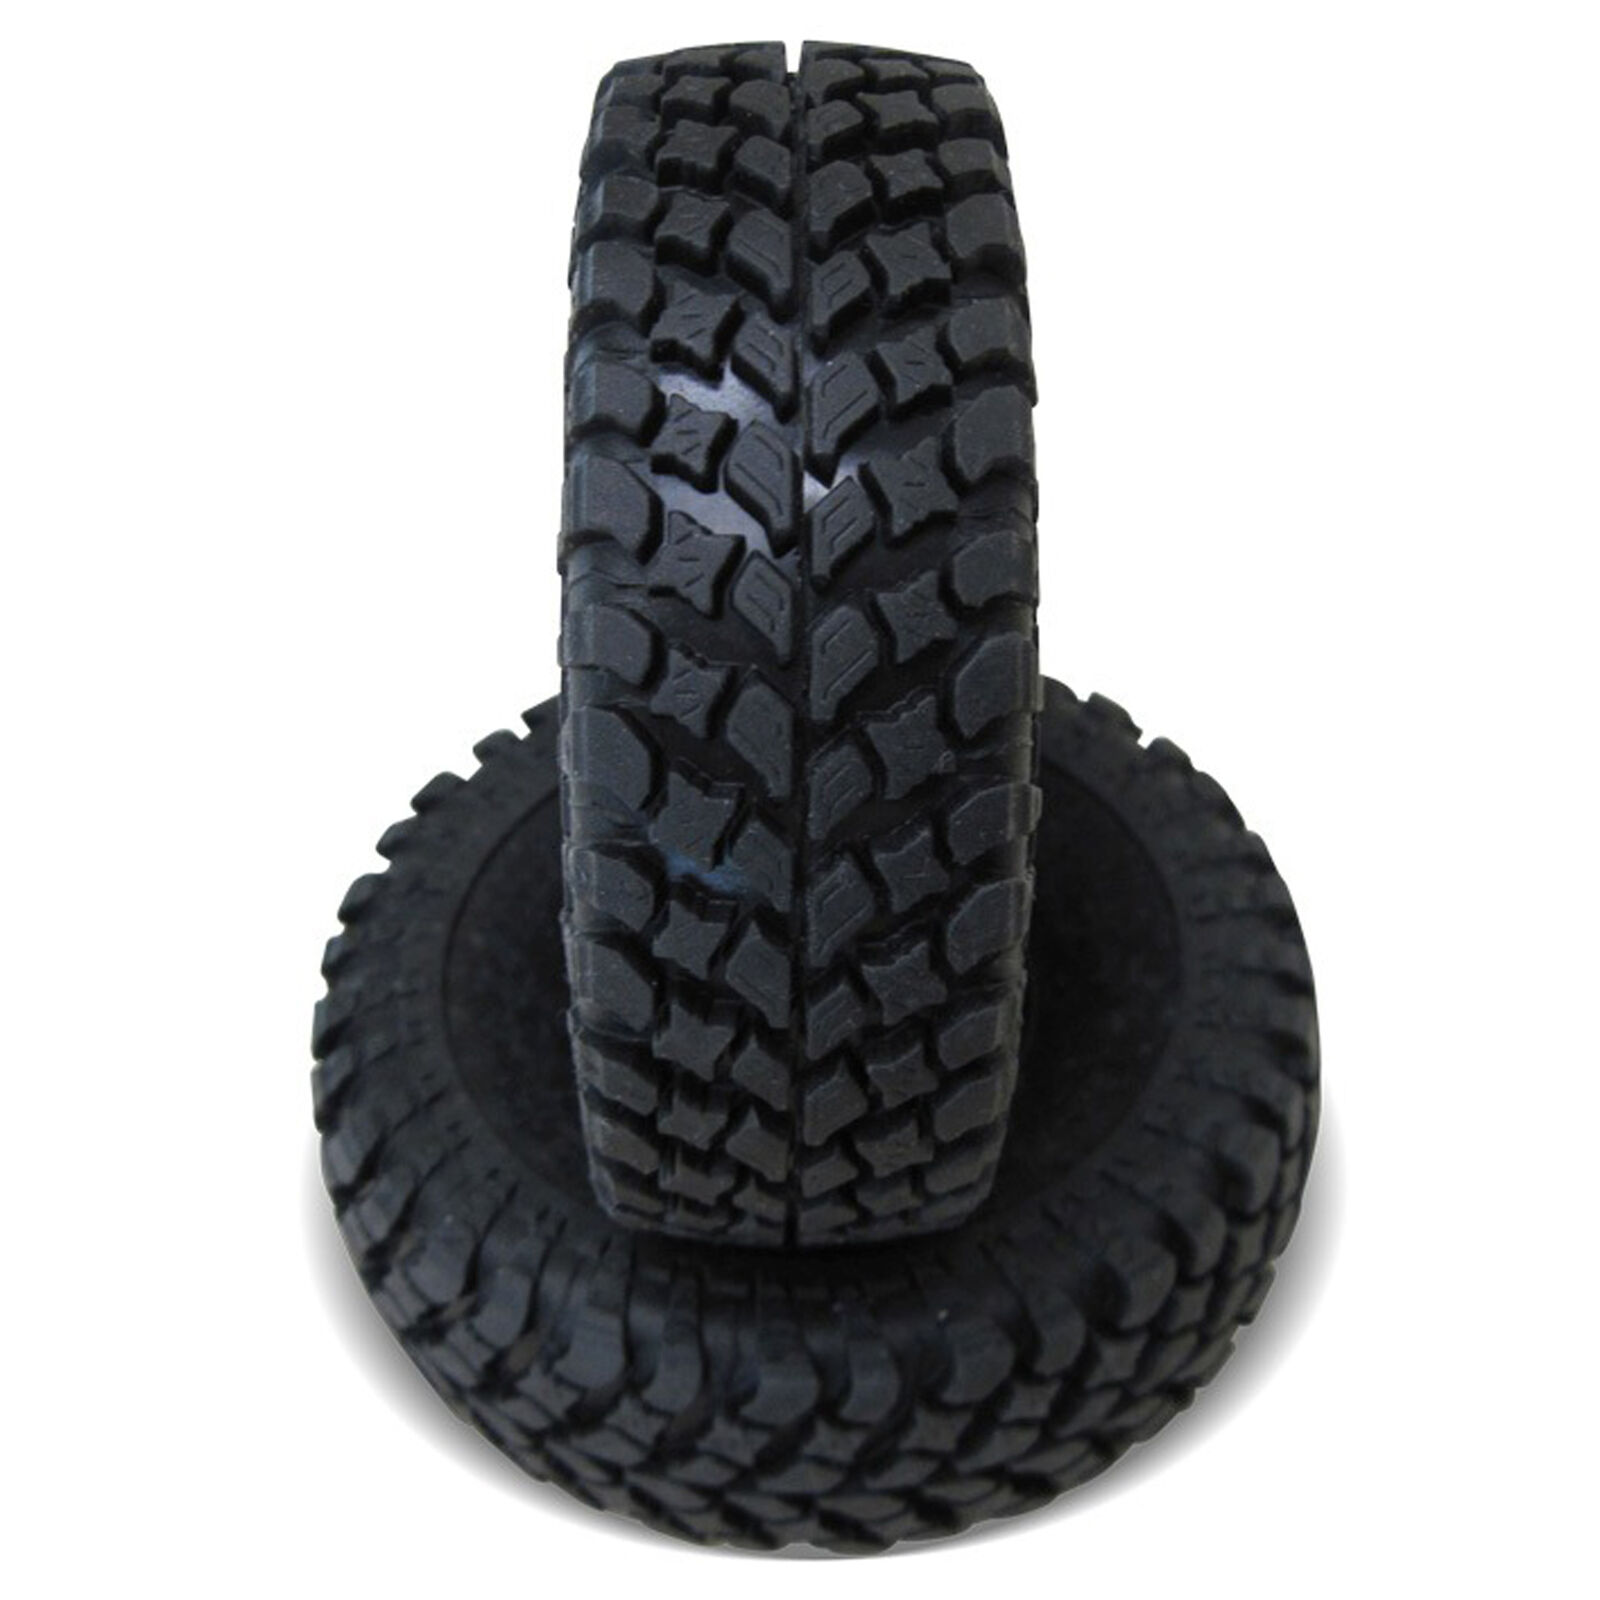 1.55 Growler AT/Extra Komp Kompound Crawler Tires with 2-Stage Foam Inserts (2)